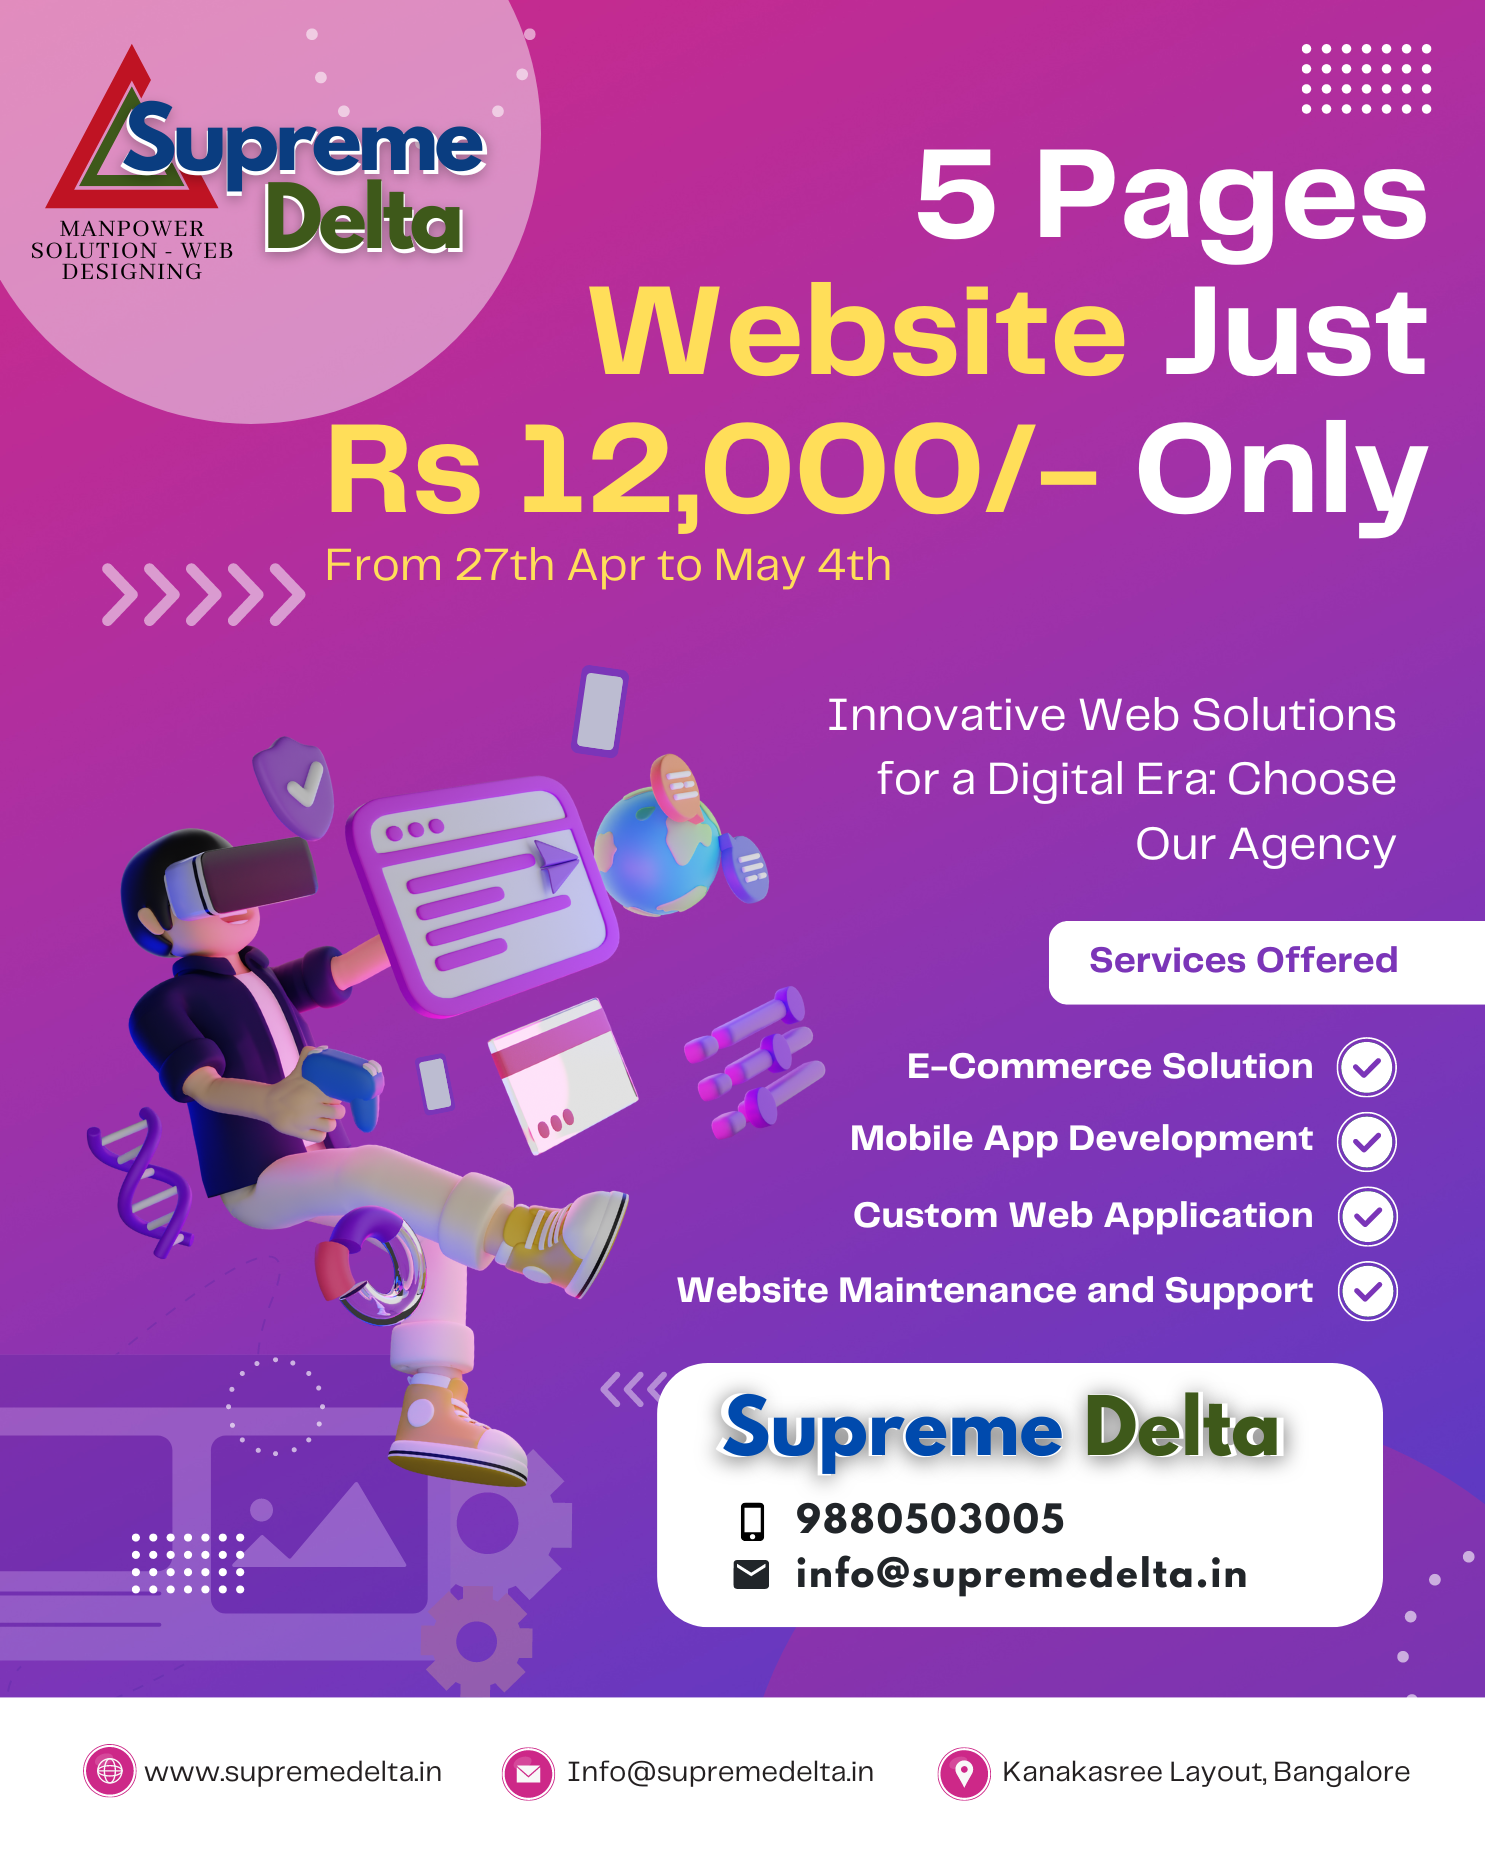 5 Pages Website Just Rs 12,000/- Only